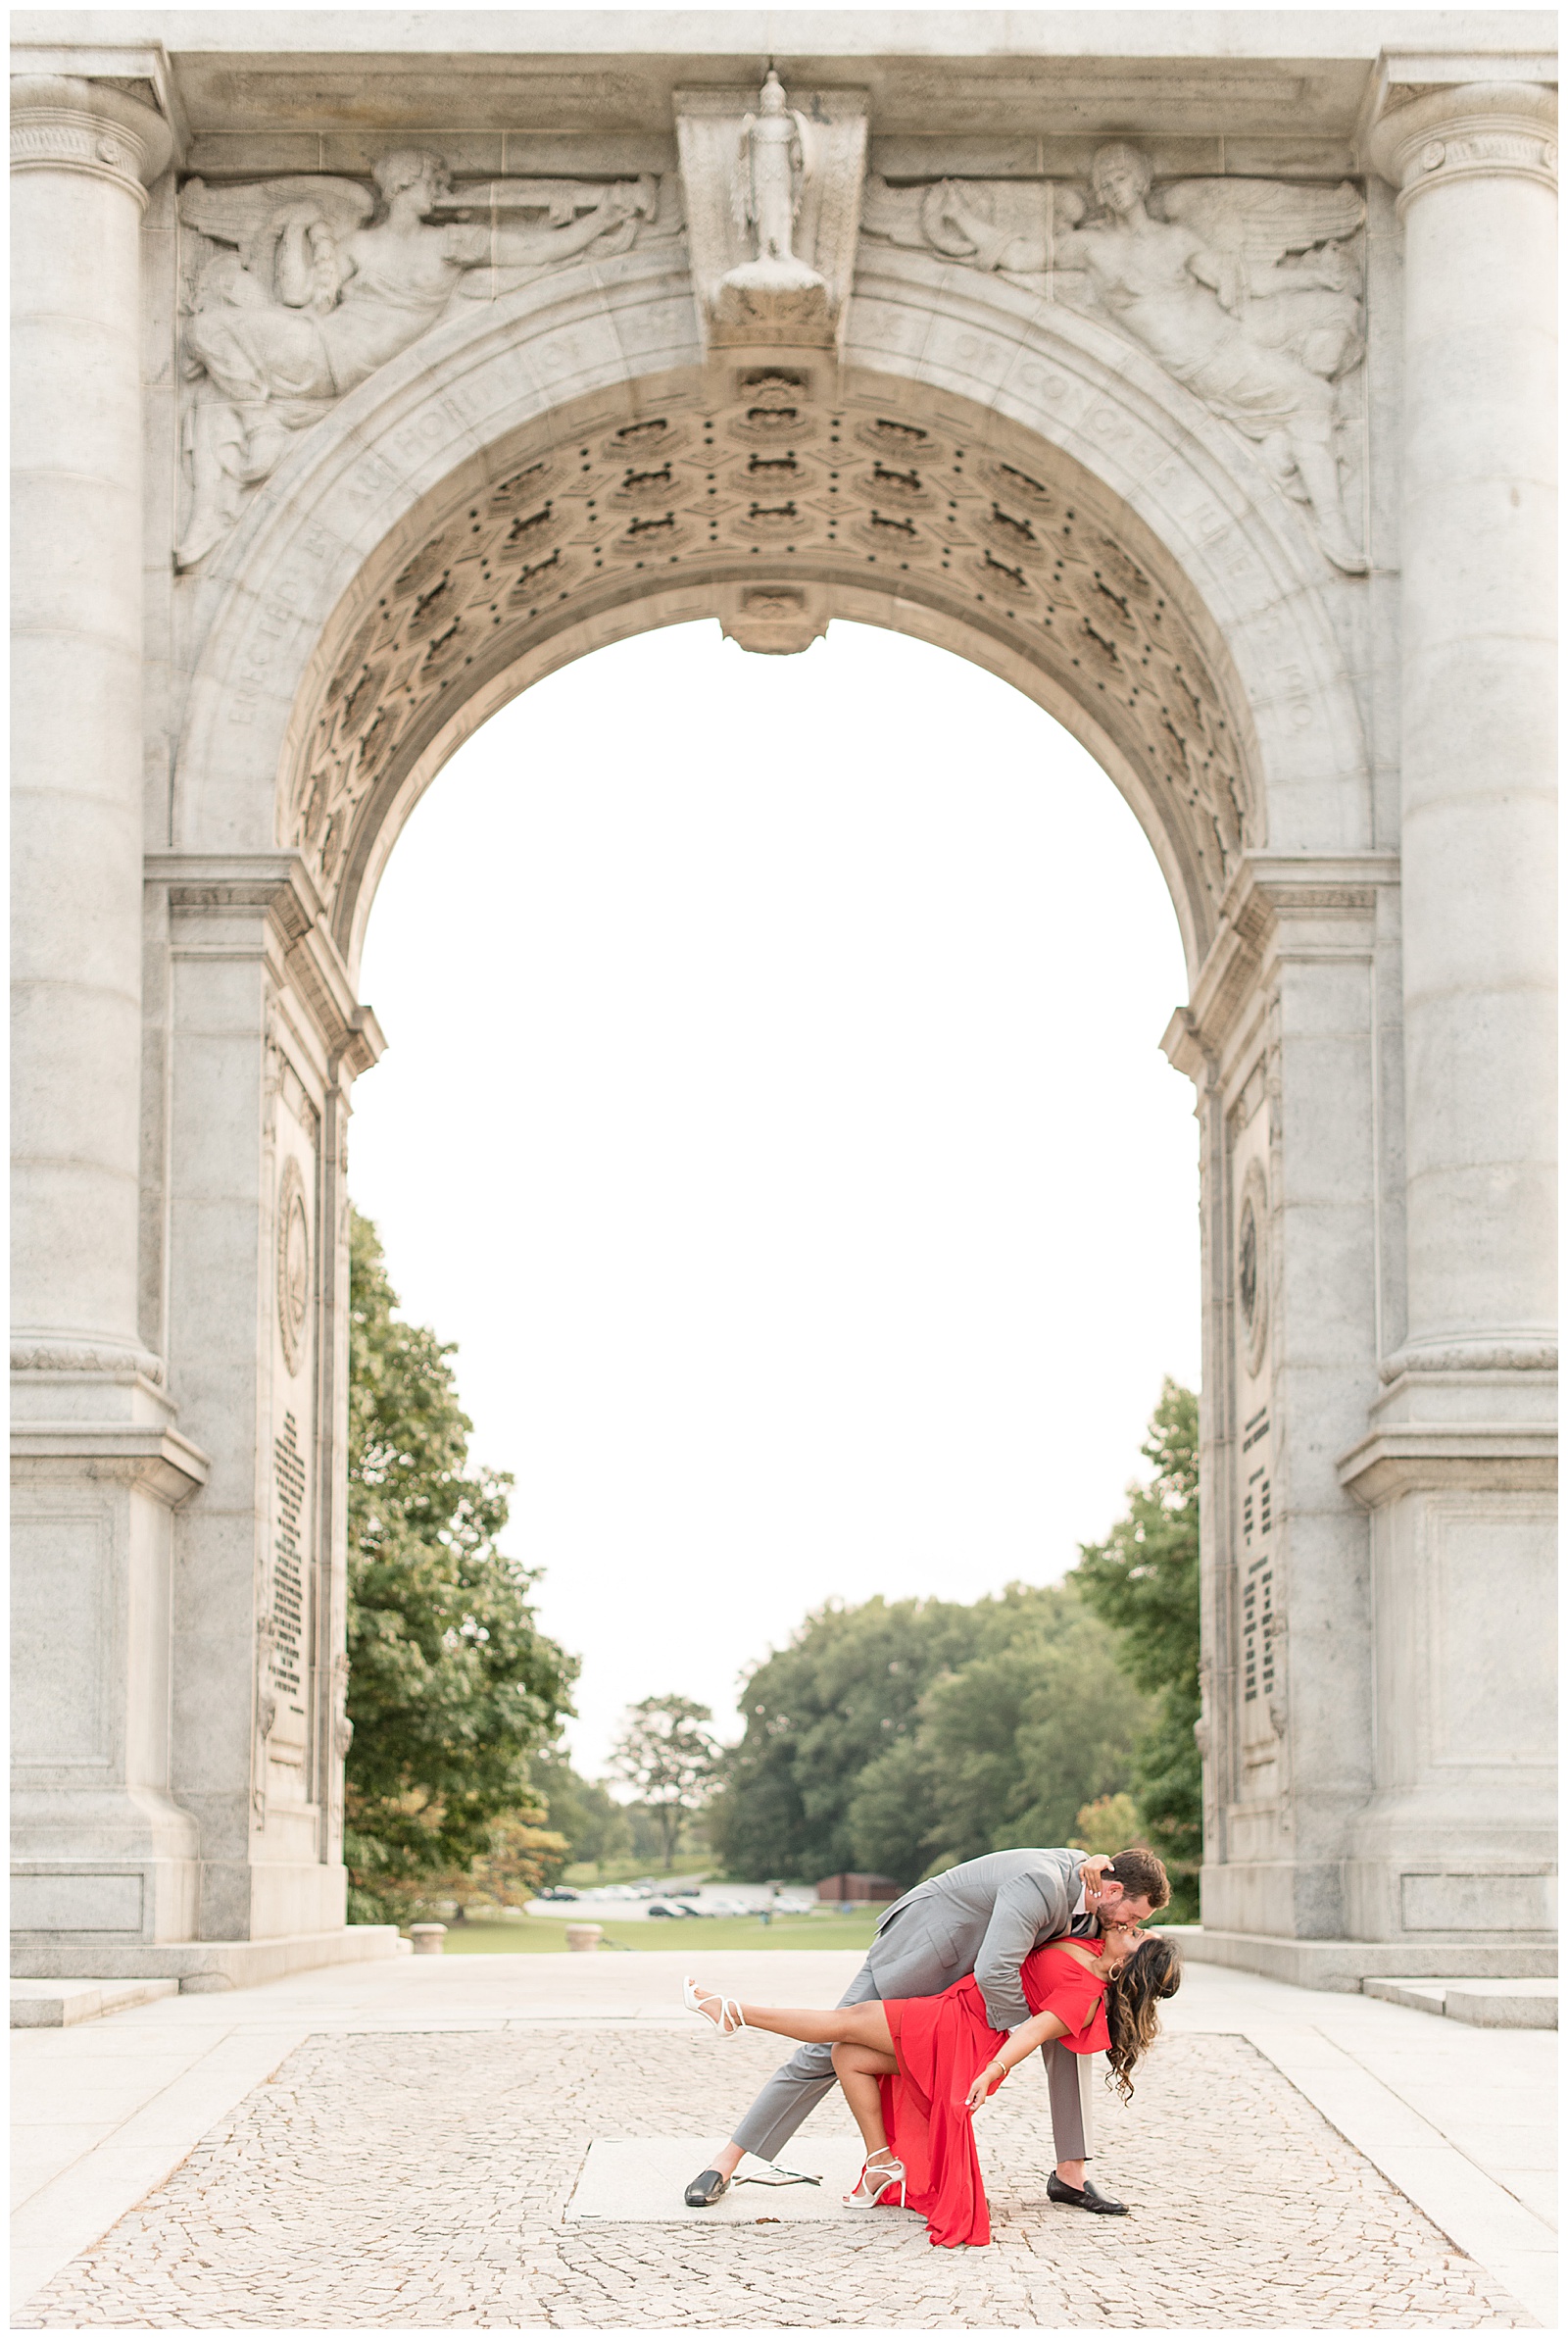 the couple is standing on the walkway under the archway and the guy is dipping the girl backwards with her left foot extended outward and he is slightly behind her on the left and there are trees in the distance behind them at the National Memorial Arch in Valley Forge, PA